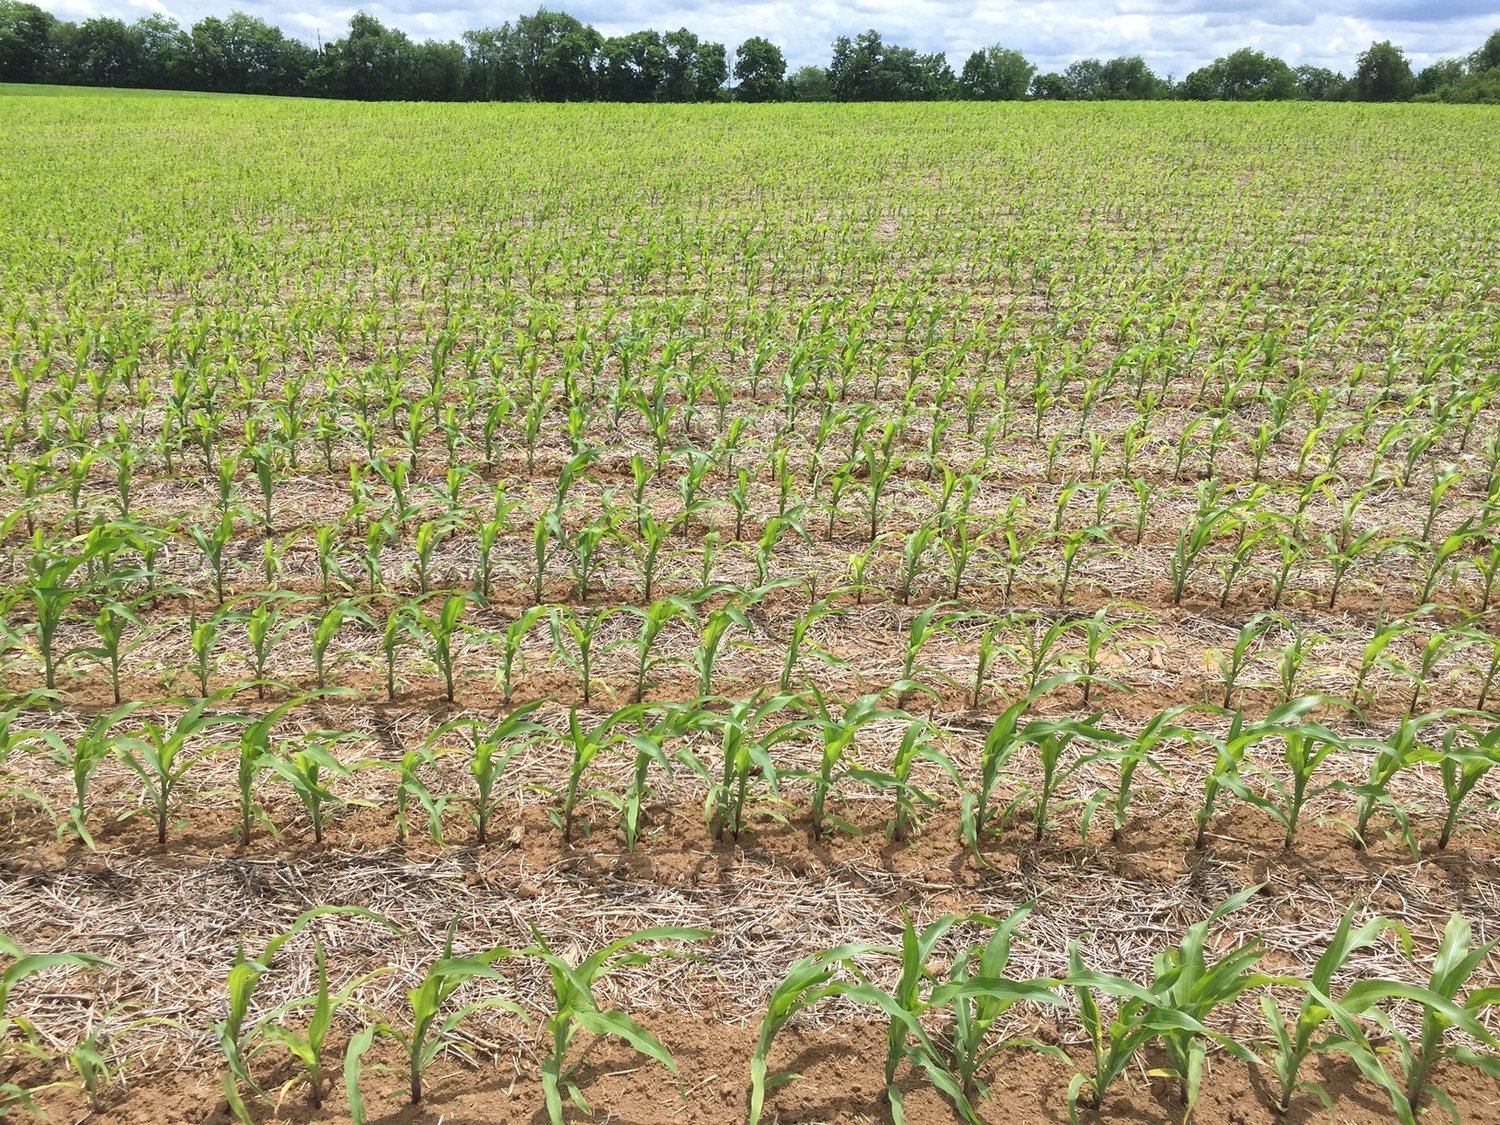  Corn seeded less than one-inch deep in is resulting in nutrient deficiencies in this field. With a little rain and sunshine, this field will grow out of problem in seven days. 